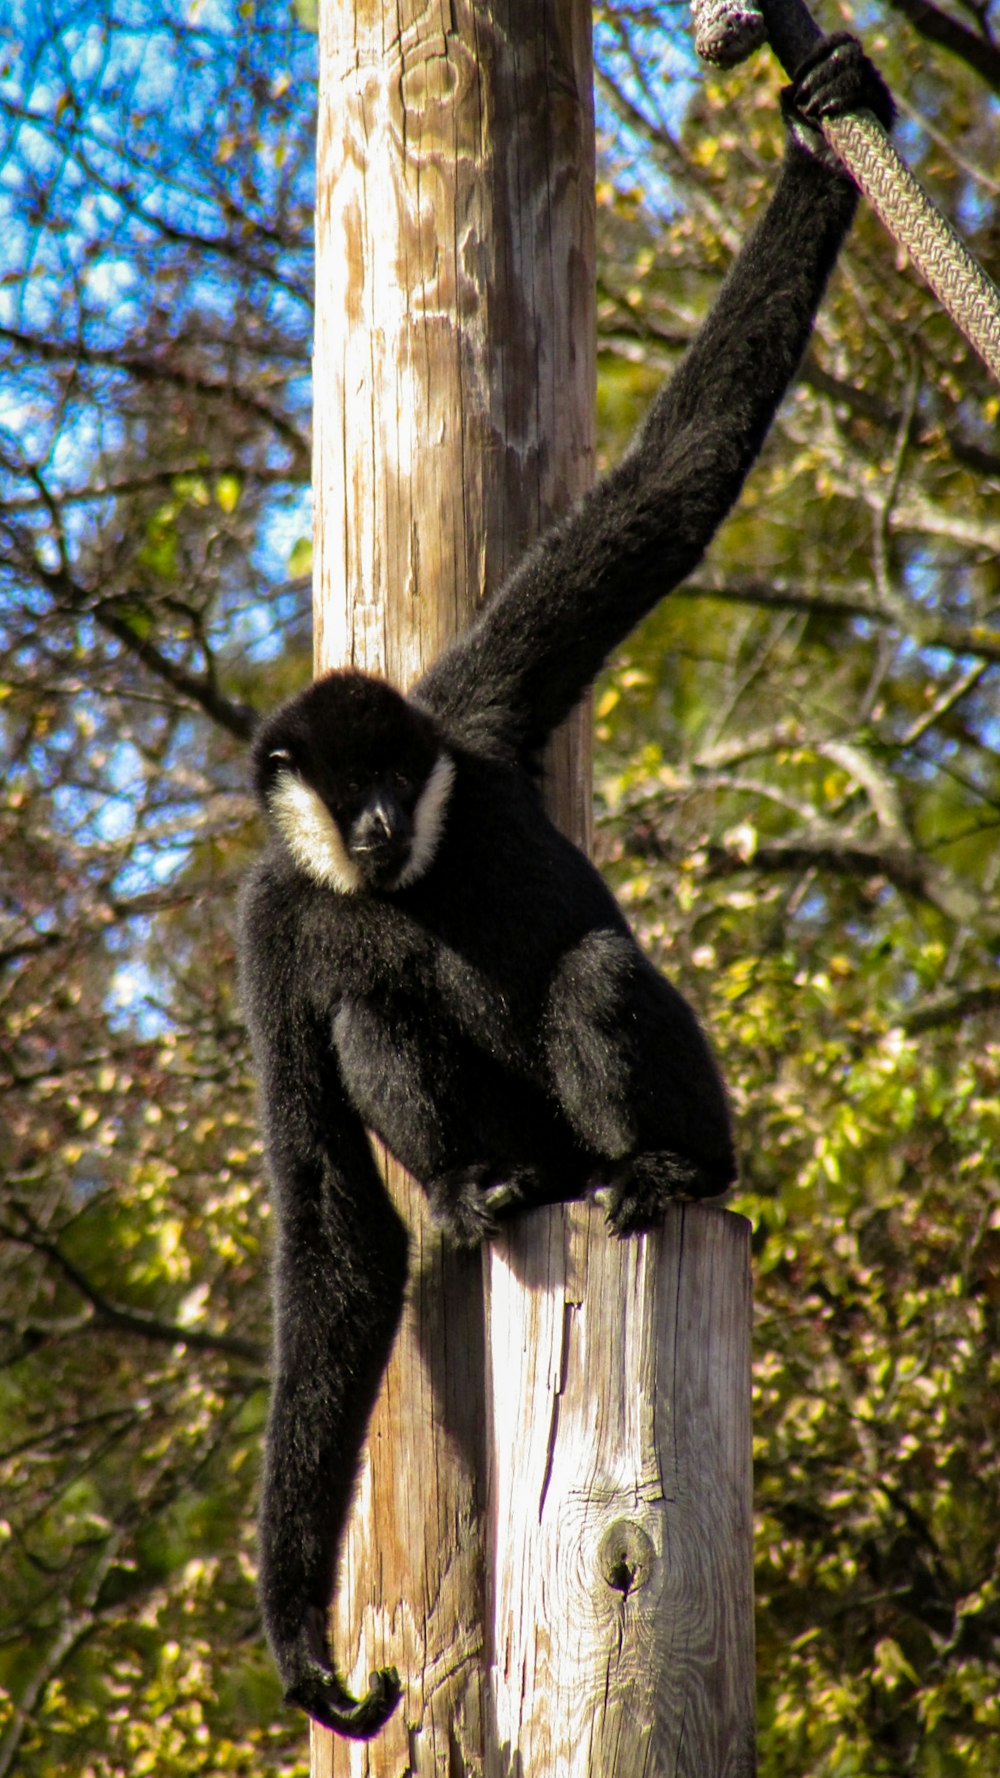 a black and white monkey climbing up a wooden pole